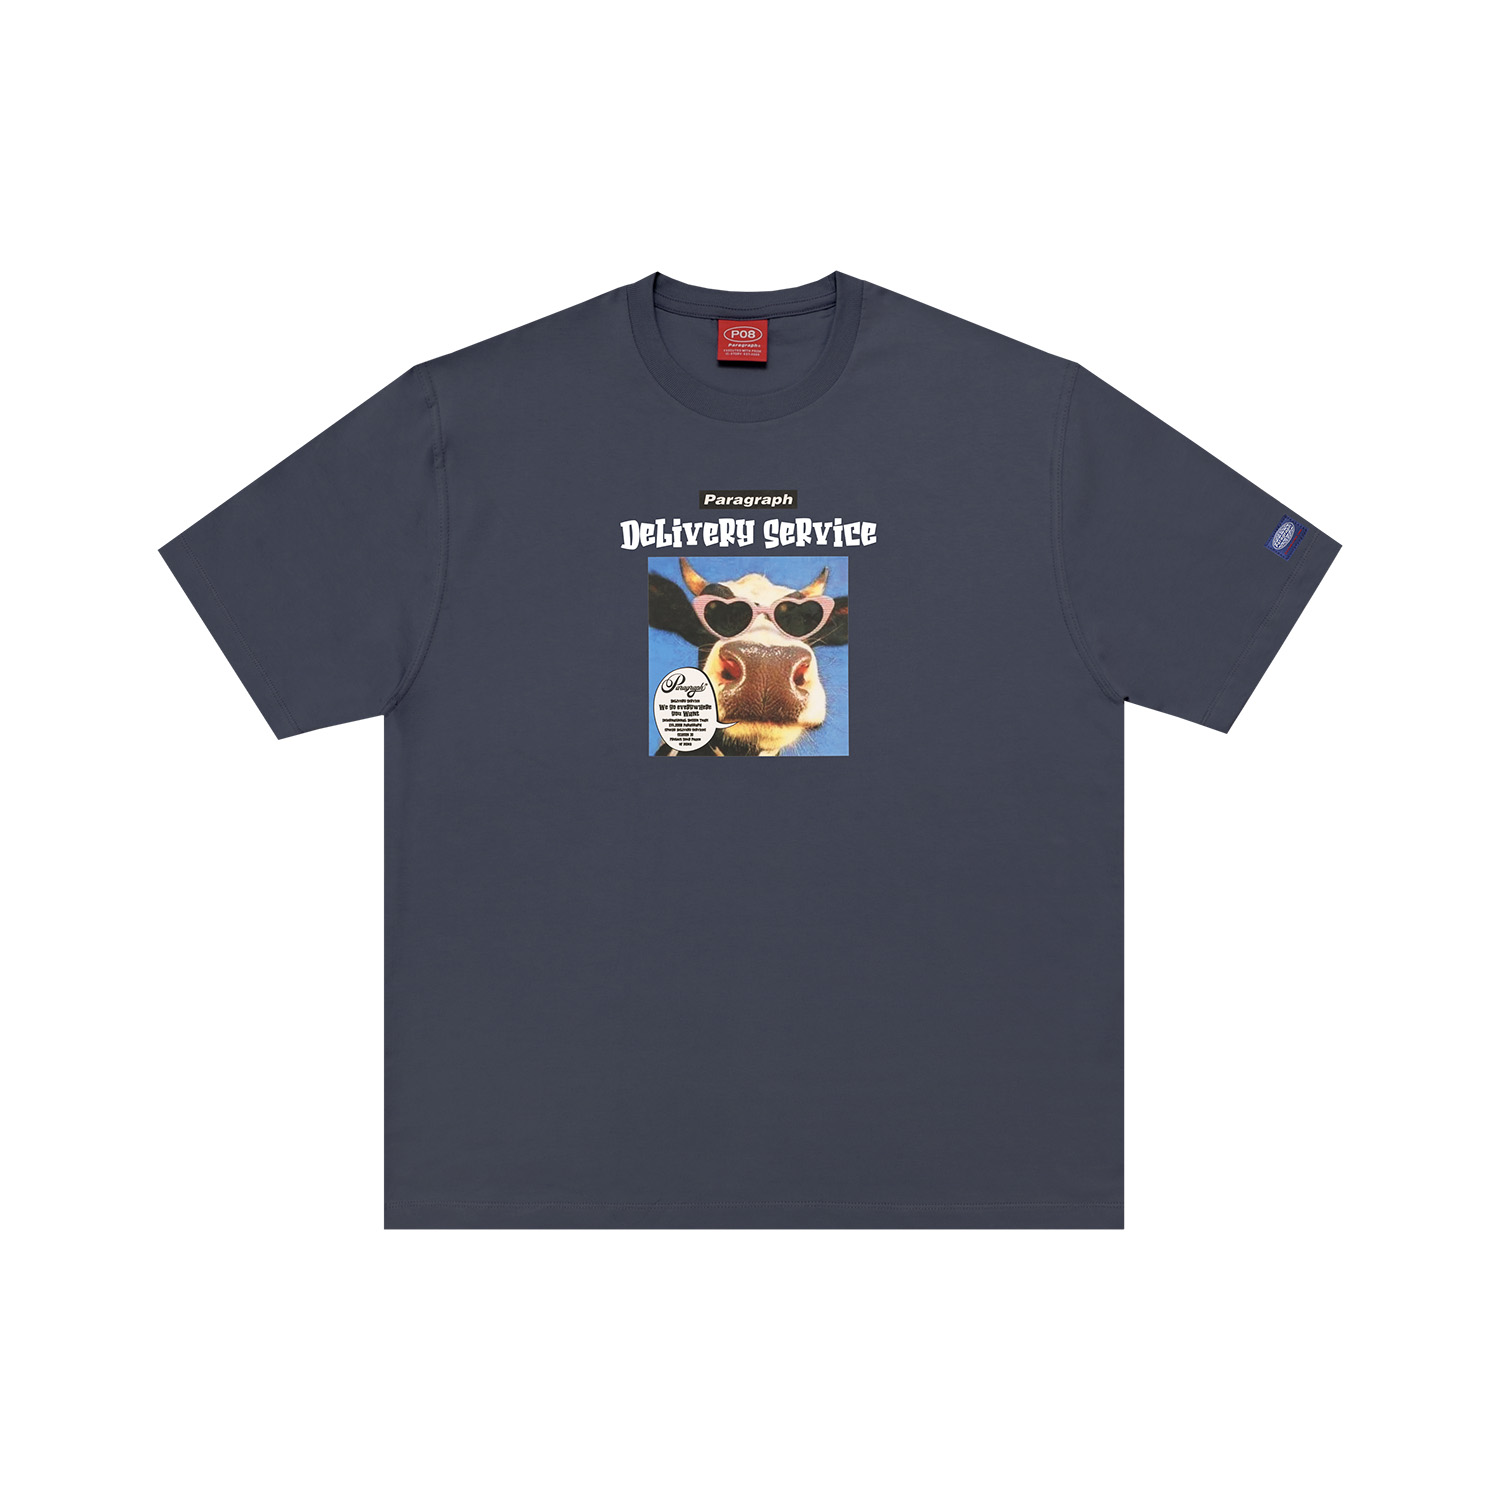 DELIVERY SERVICE T SHIRT